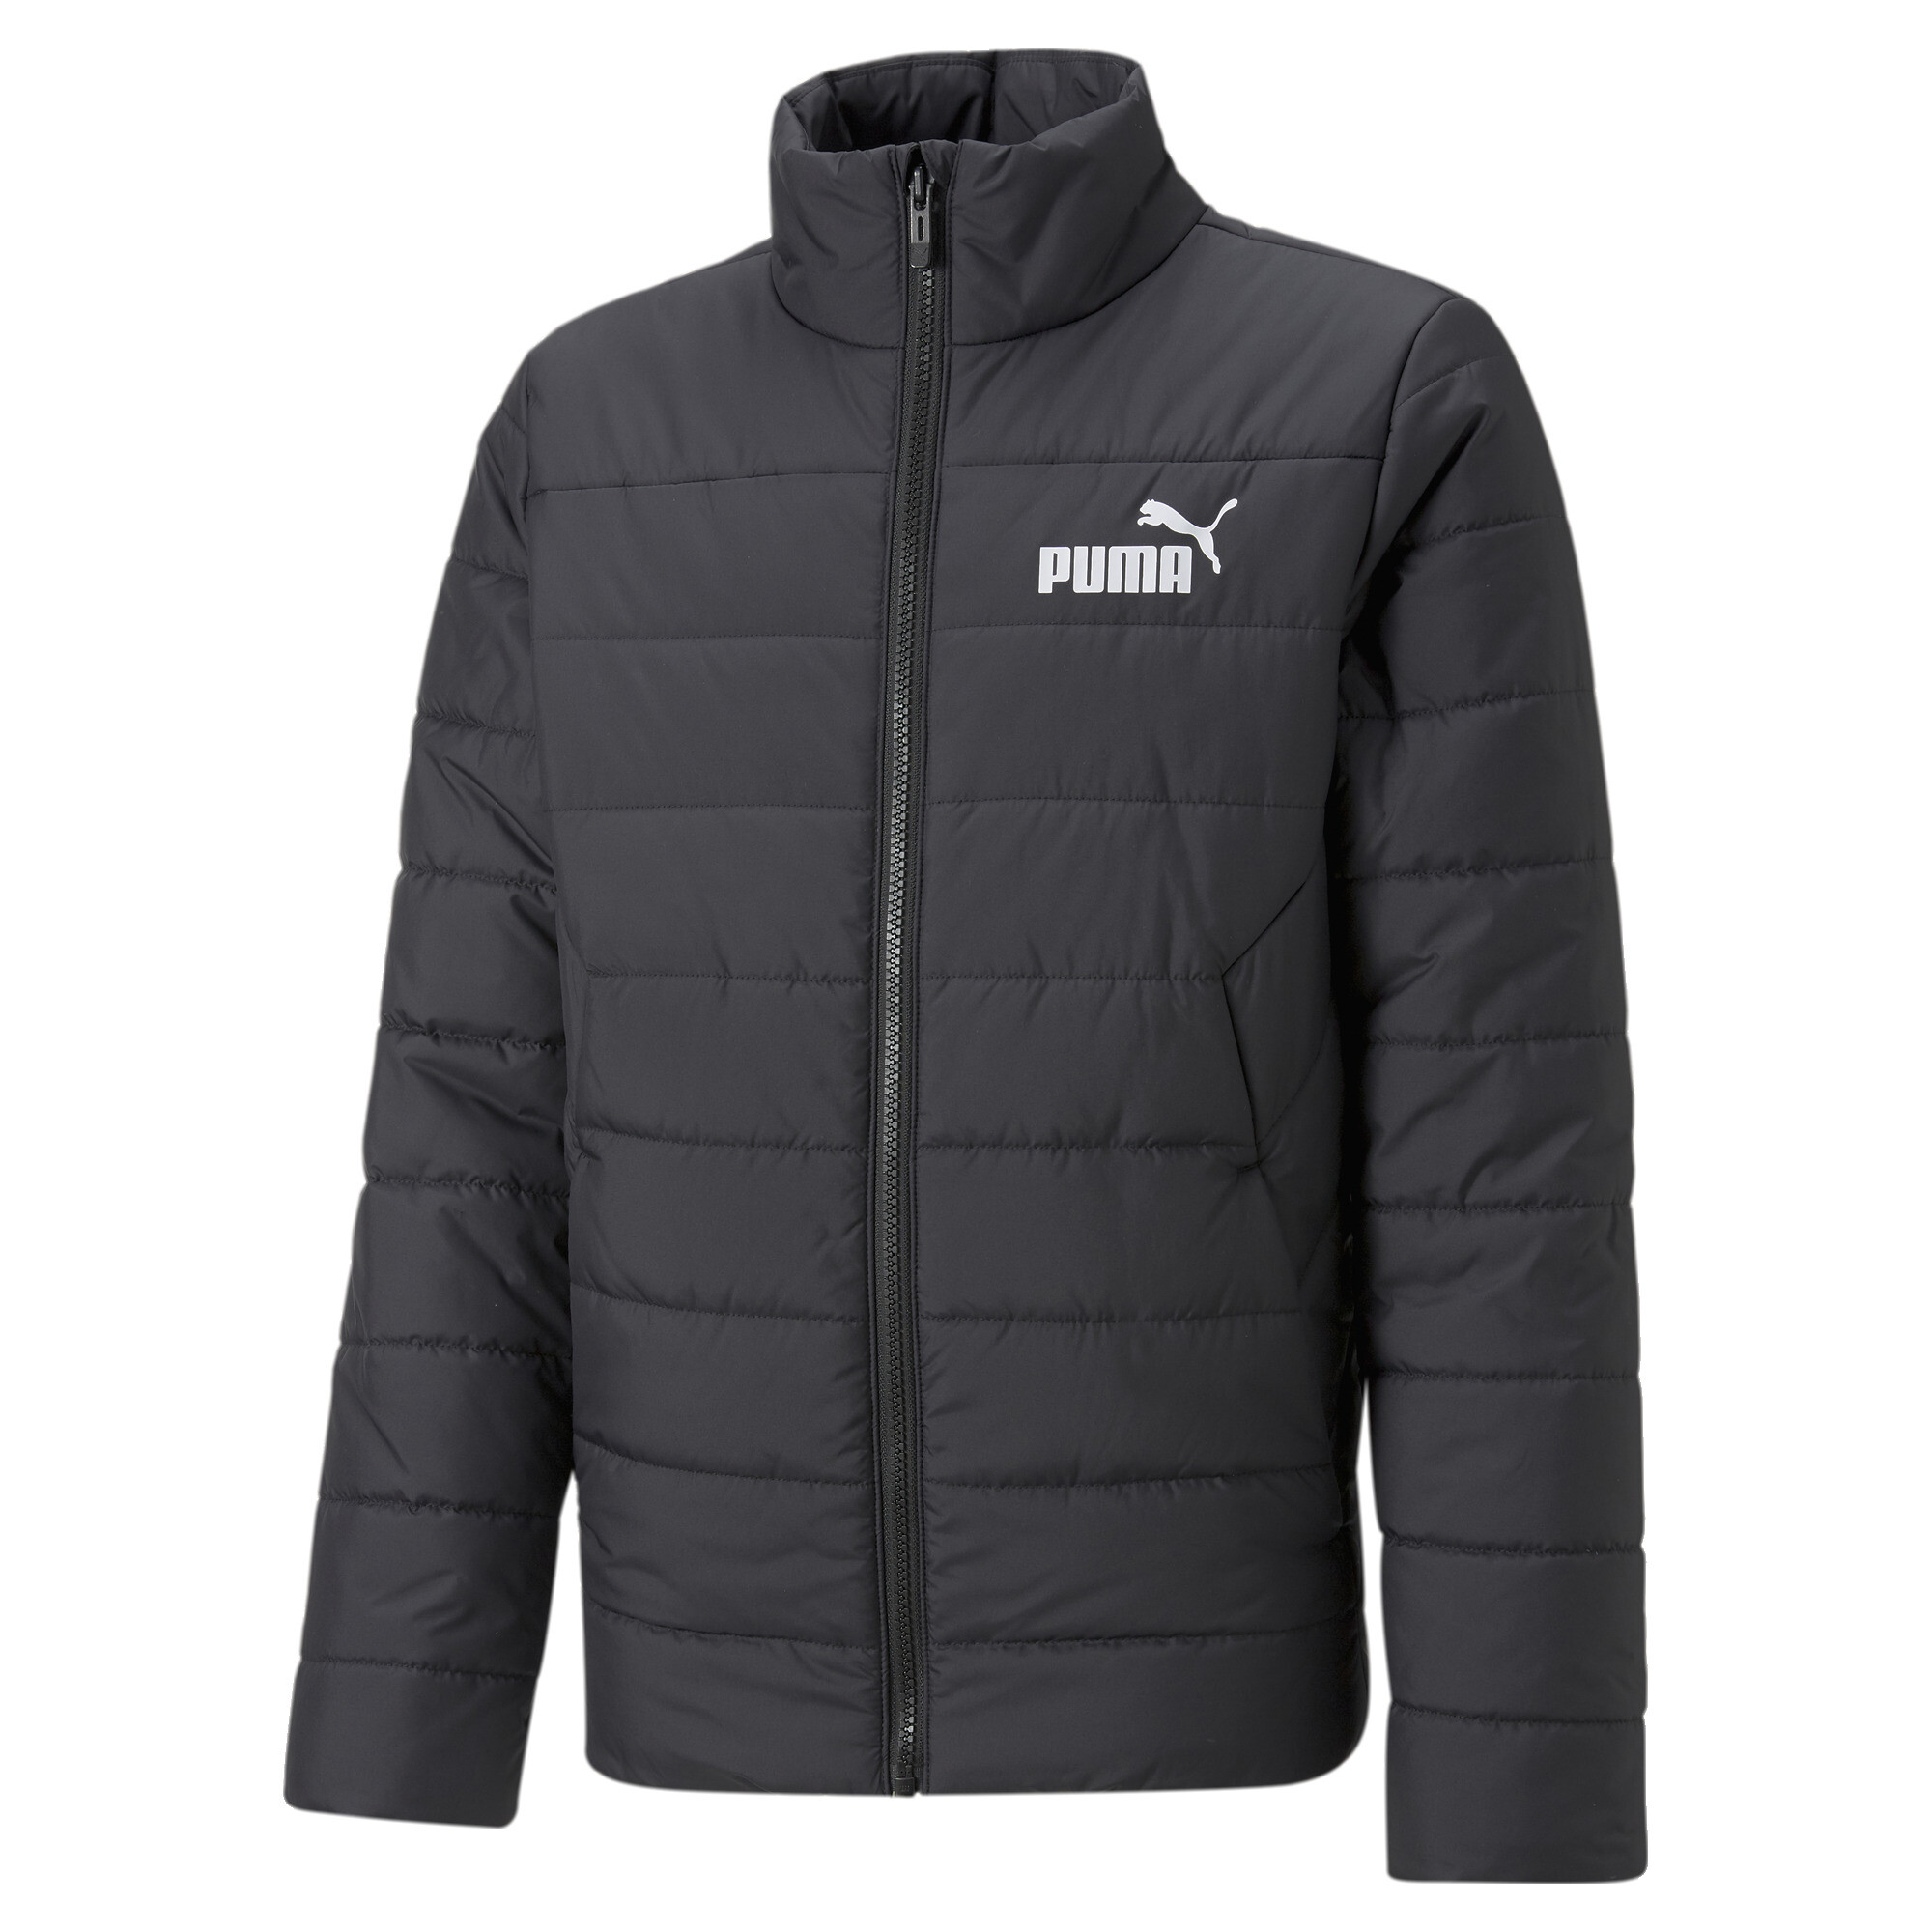 PUMA Essentials Padded Jacket In Black, Size 11-12 Youth